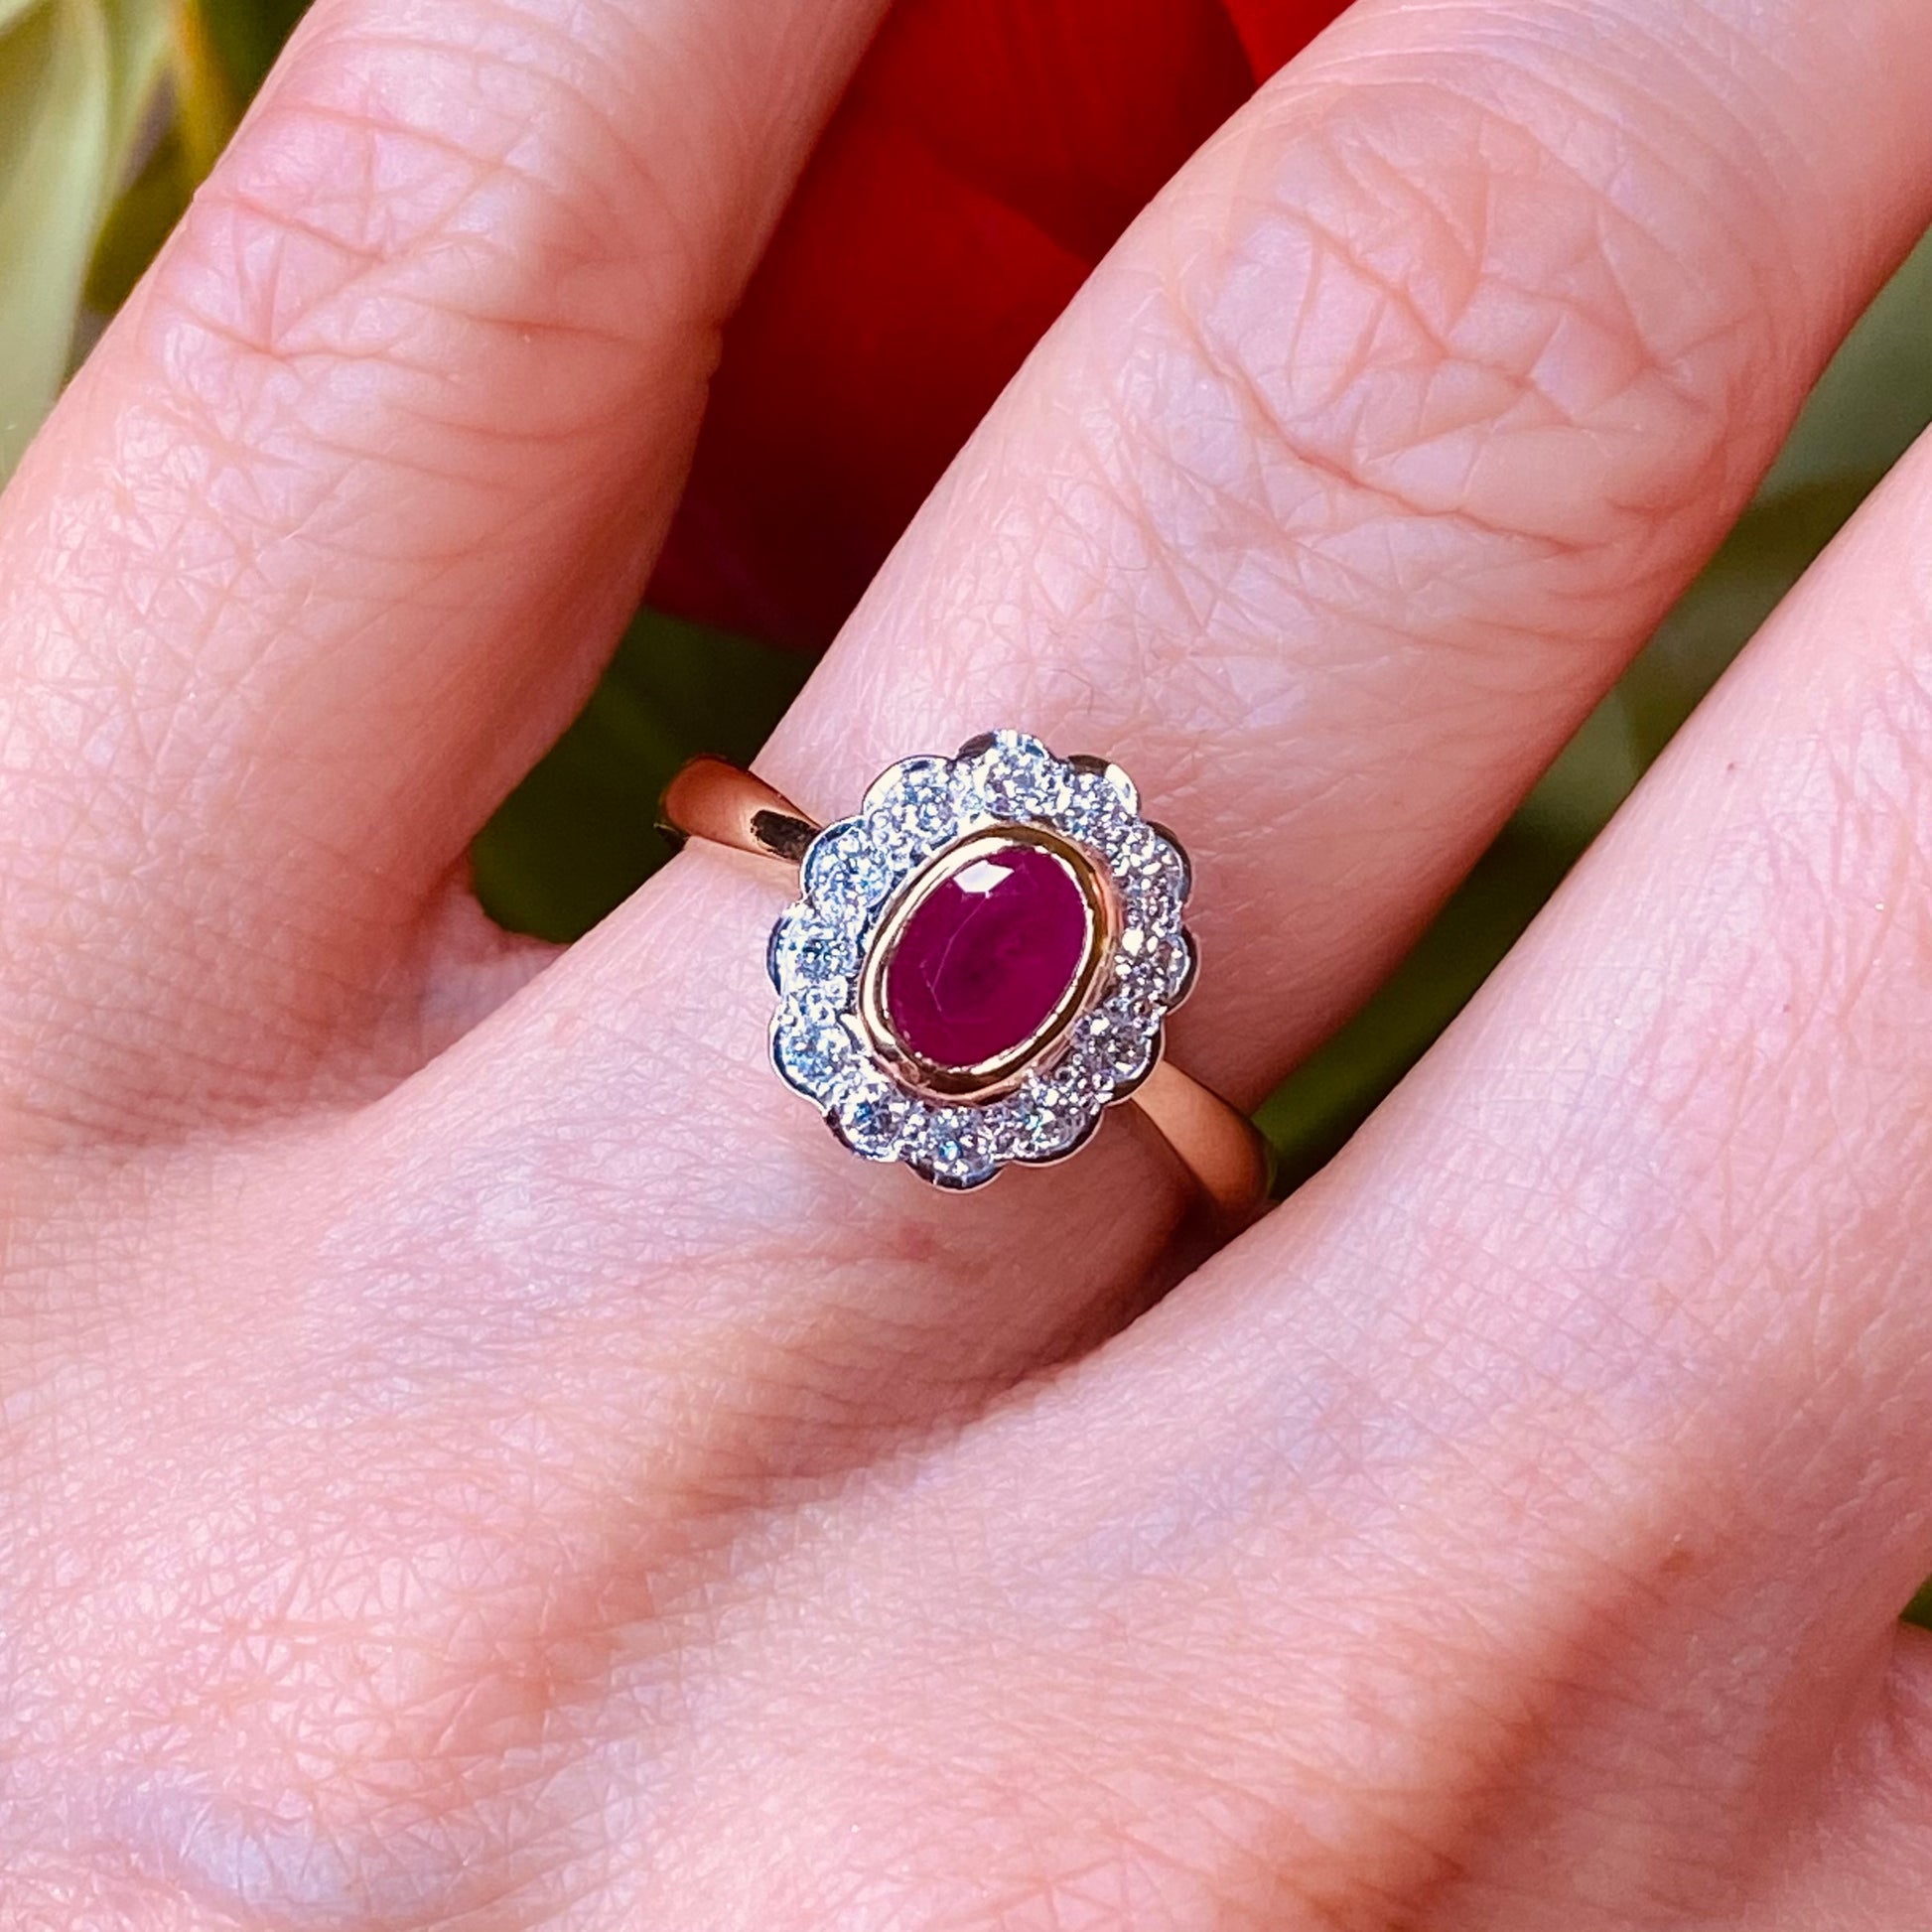 9ct Gold Ruby & Diamond Cluster Ring  Natural Oval Cut Ruby  0.30ct of round brilliant cut diamonds  Size O